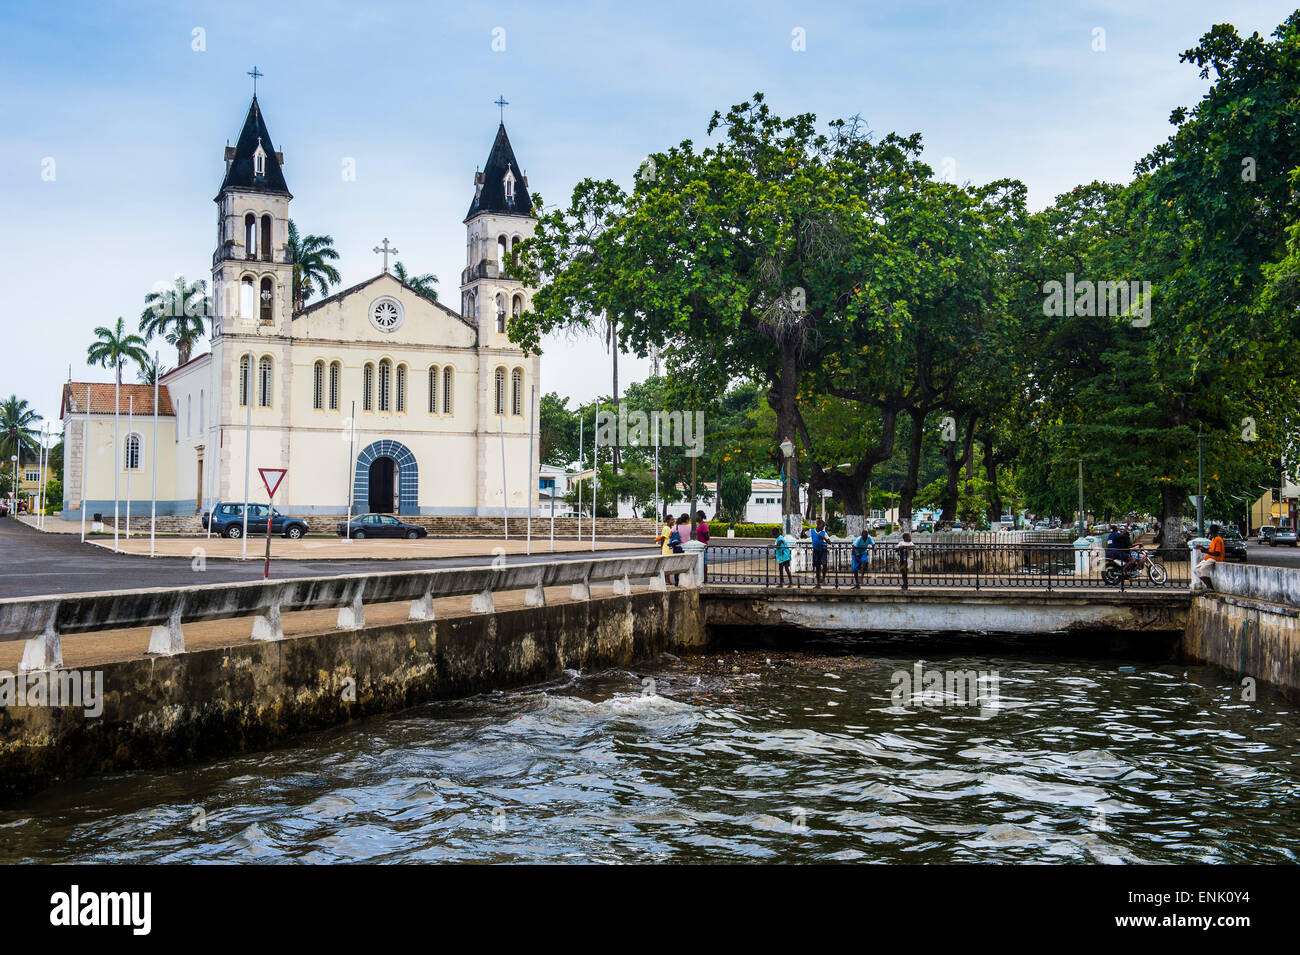 The cathedral of the city of Sao Tome, Sao Tome and Principe, Atlantic Ocean, Africa Stock Photo